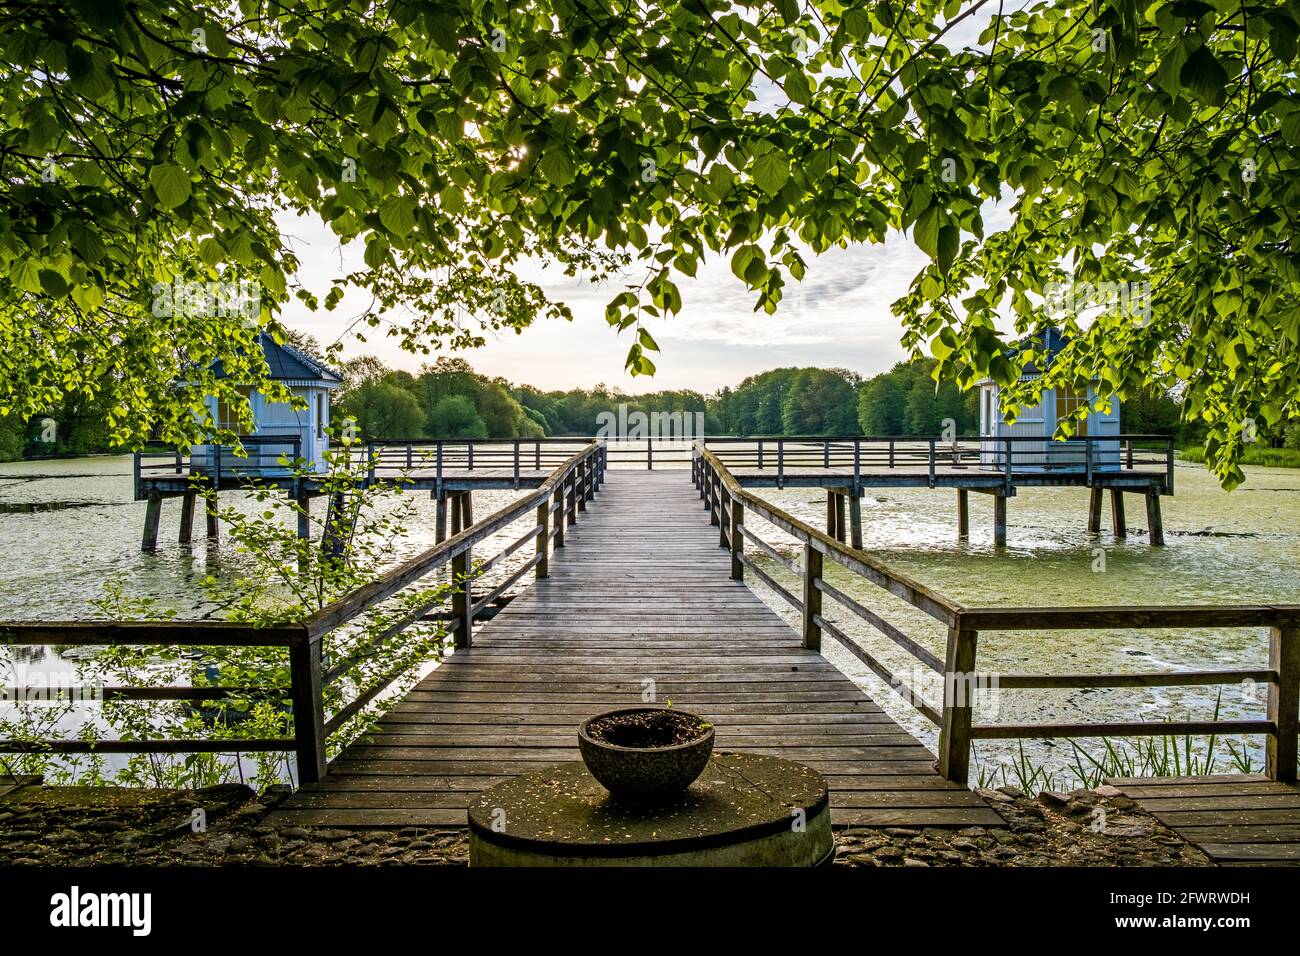 Landscape photography of a historic wooden bridge leading to two symmetric bath houses at a lakeside with greenish water surface and leafage Stock Photo